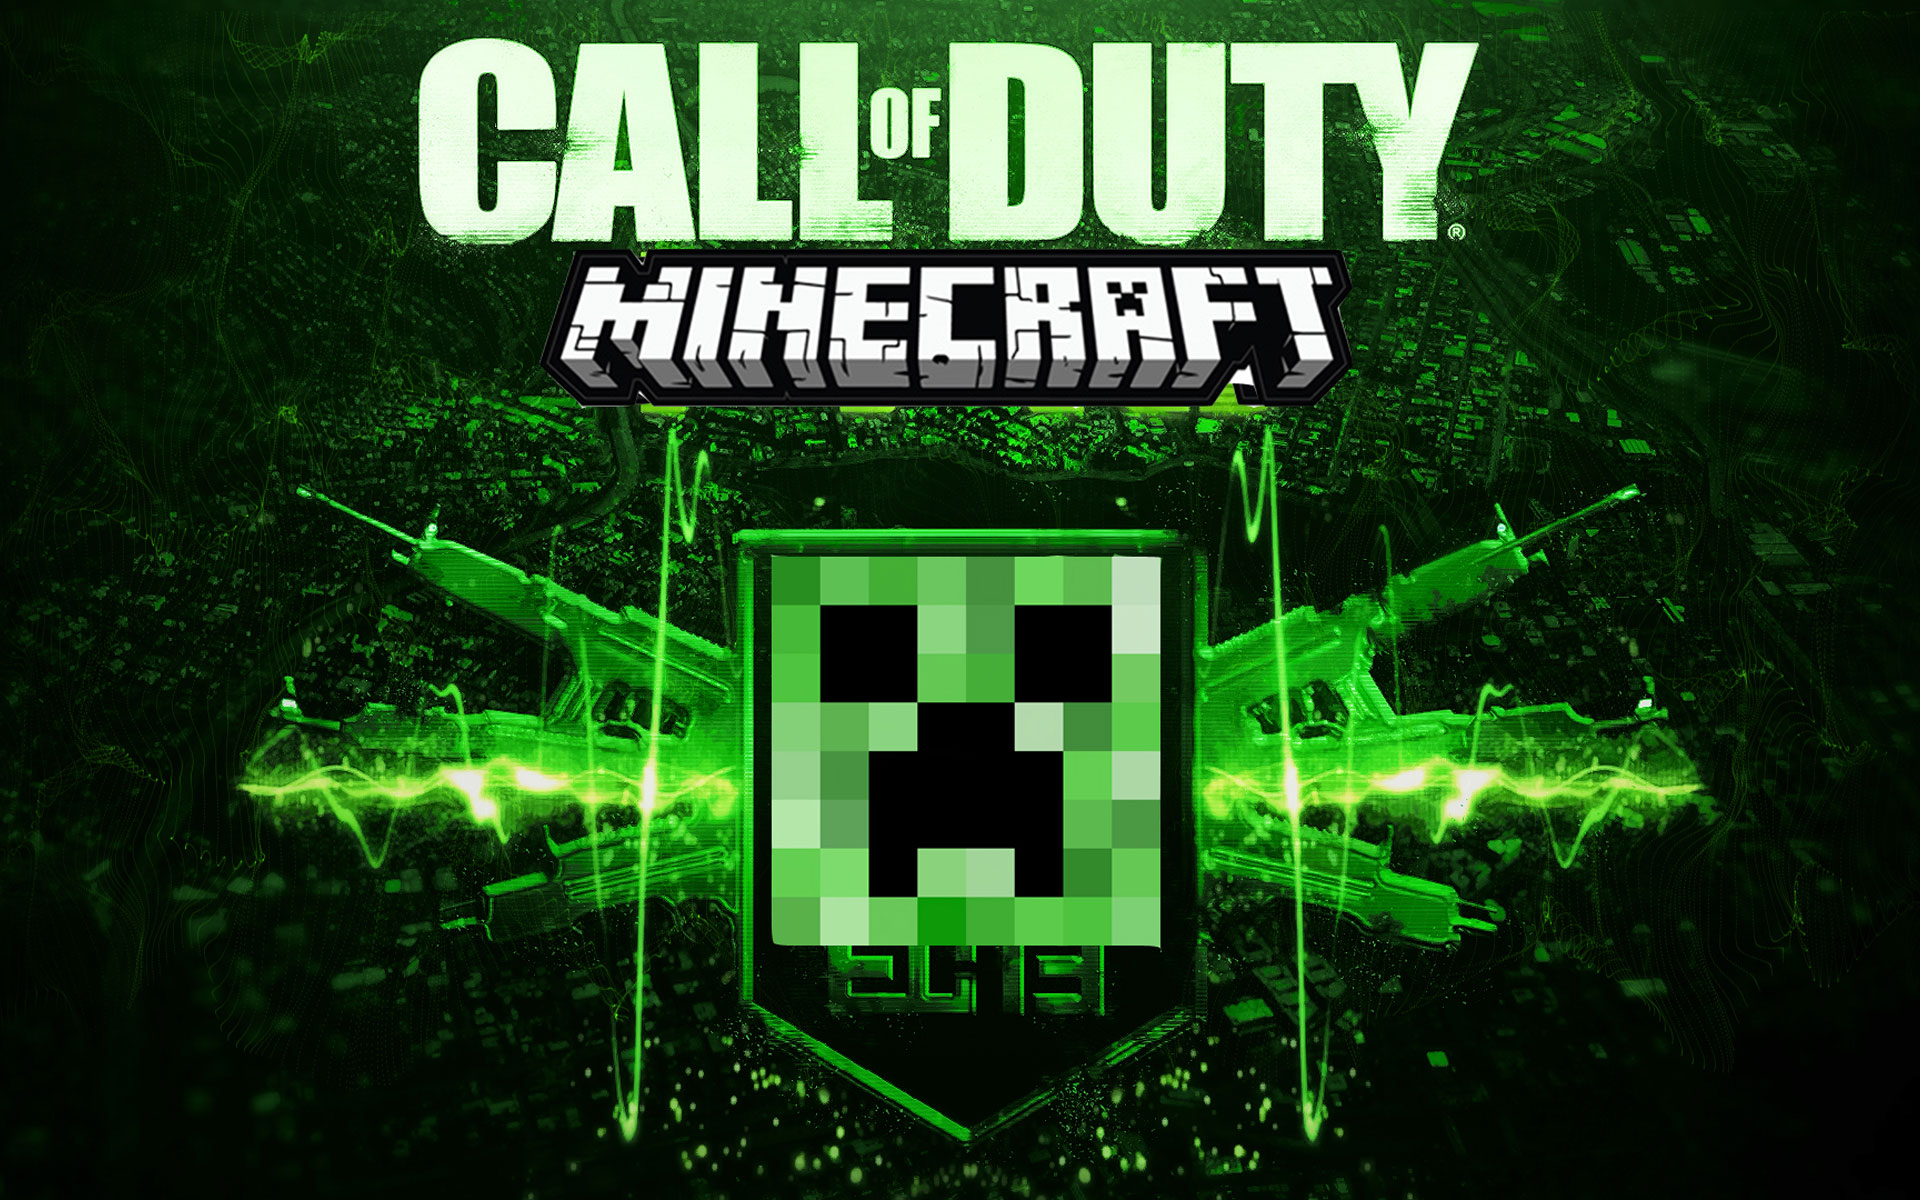 Awesome Minecraft Wallpaper Images #MD6 » www.wallpaperush.xyz